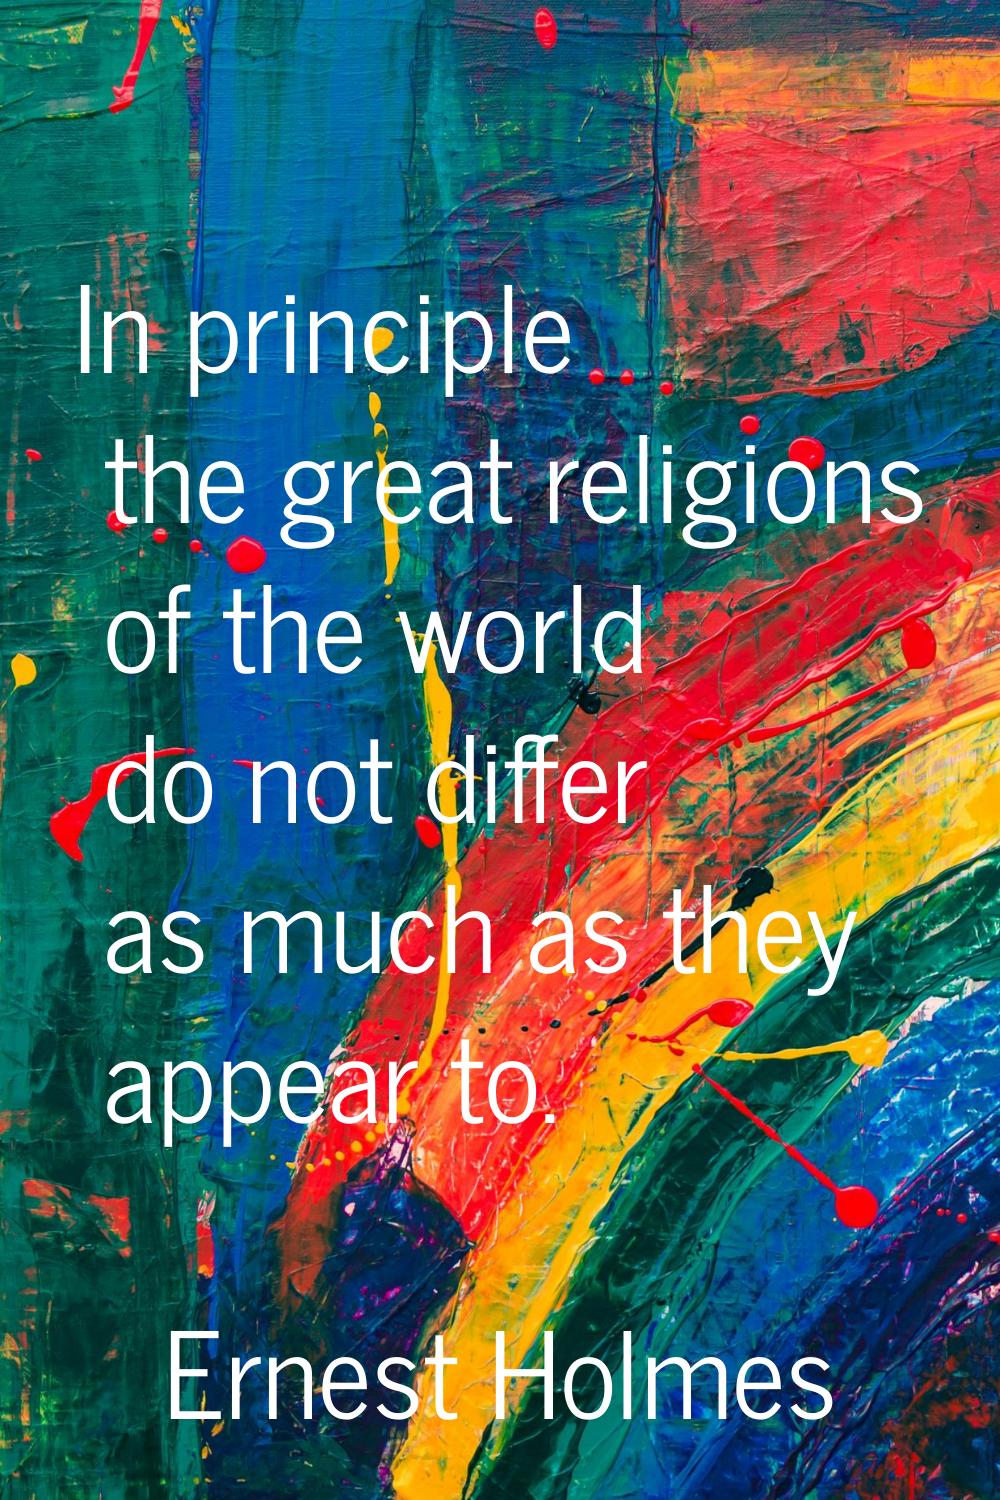 In principle the great religions of the world do not differ as much as they appear to.